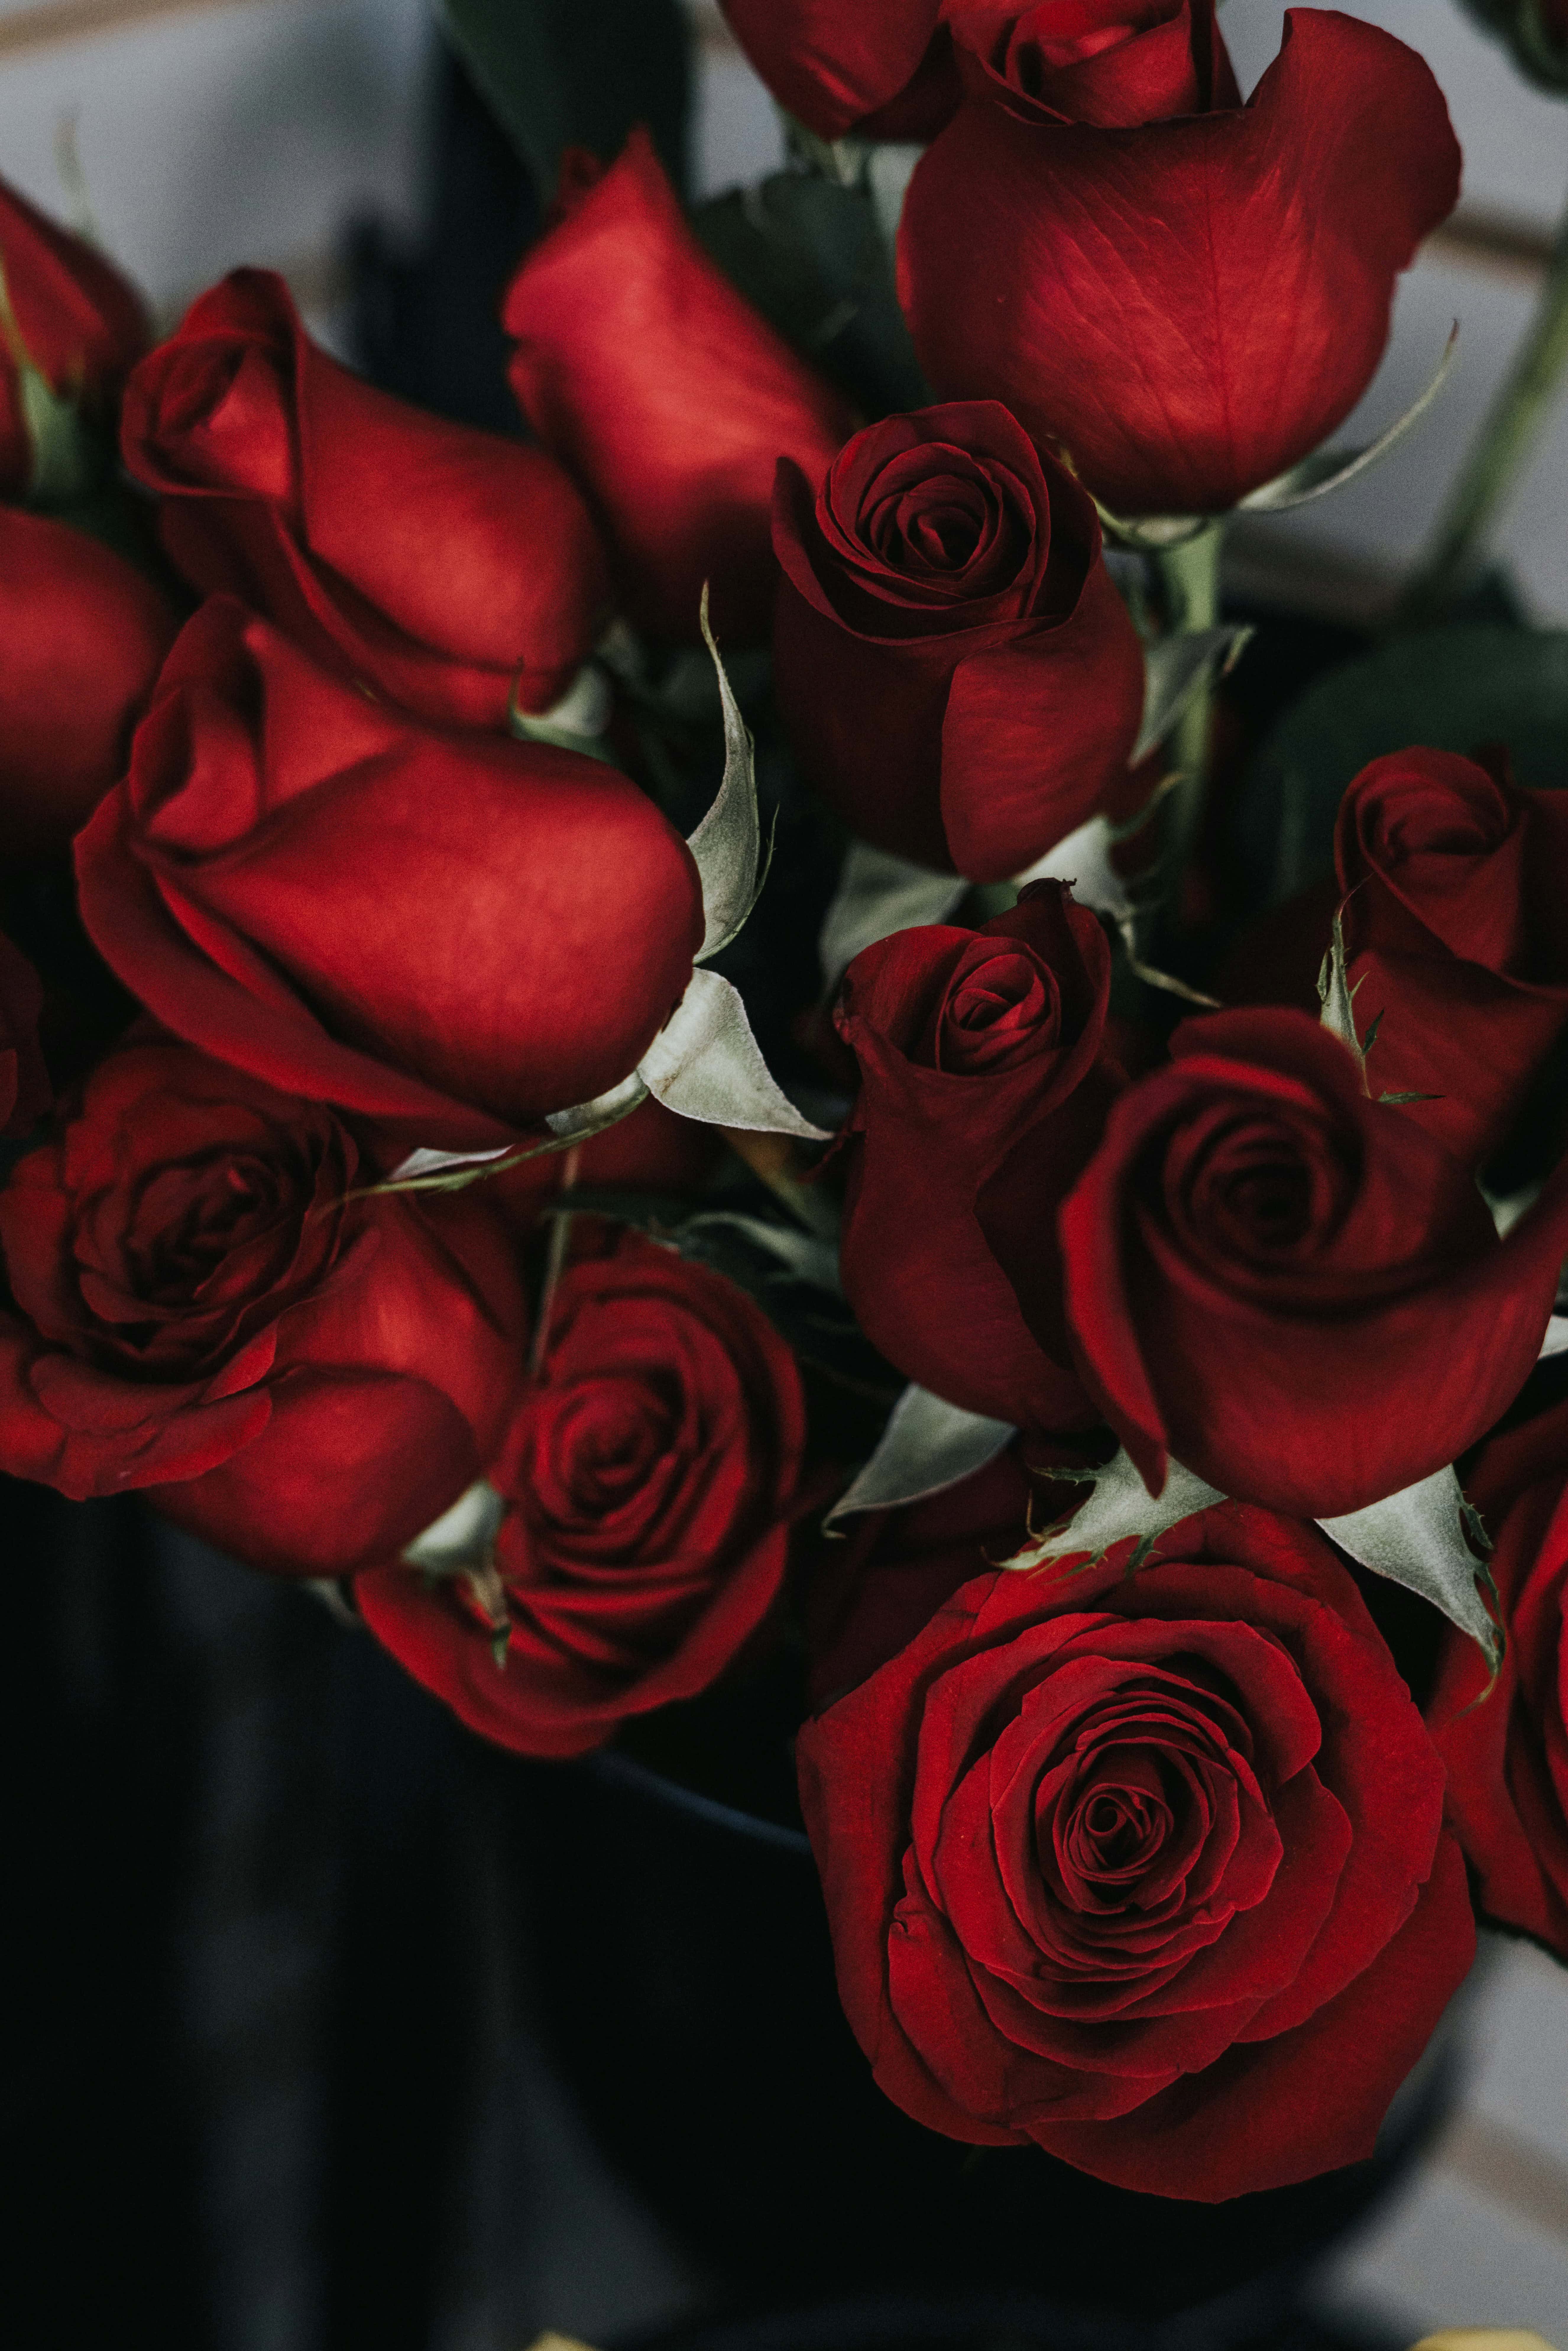 A close up of some red roses